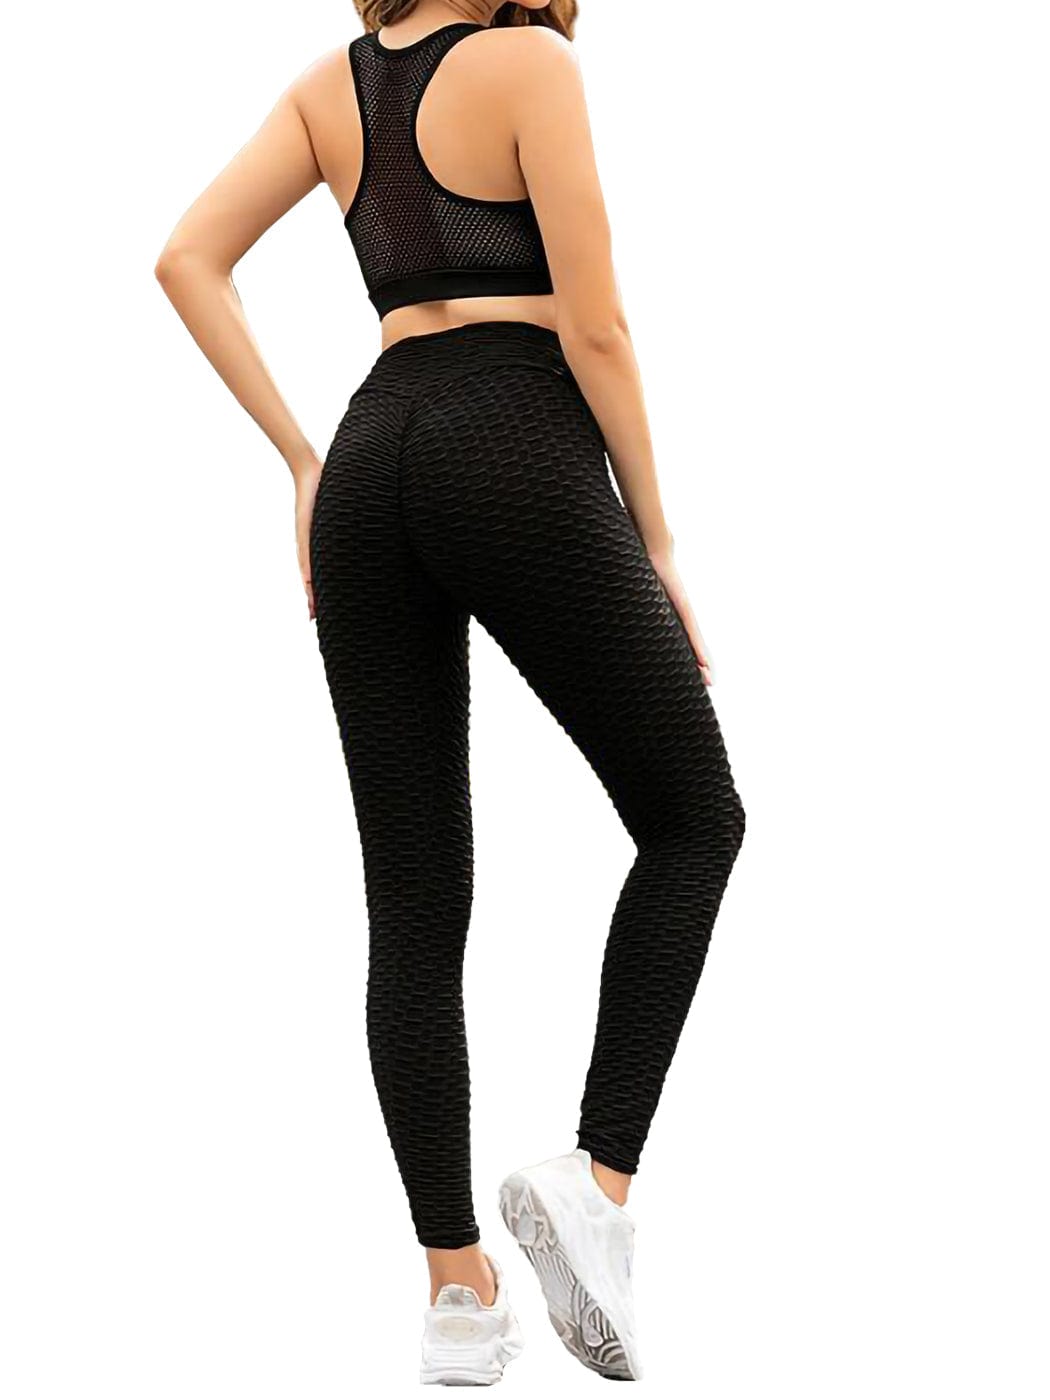 High Waisted Yoga Pants Leggings Workout Butt Lift Tights